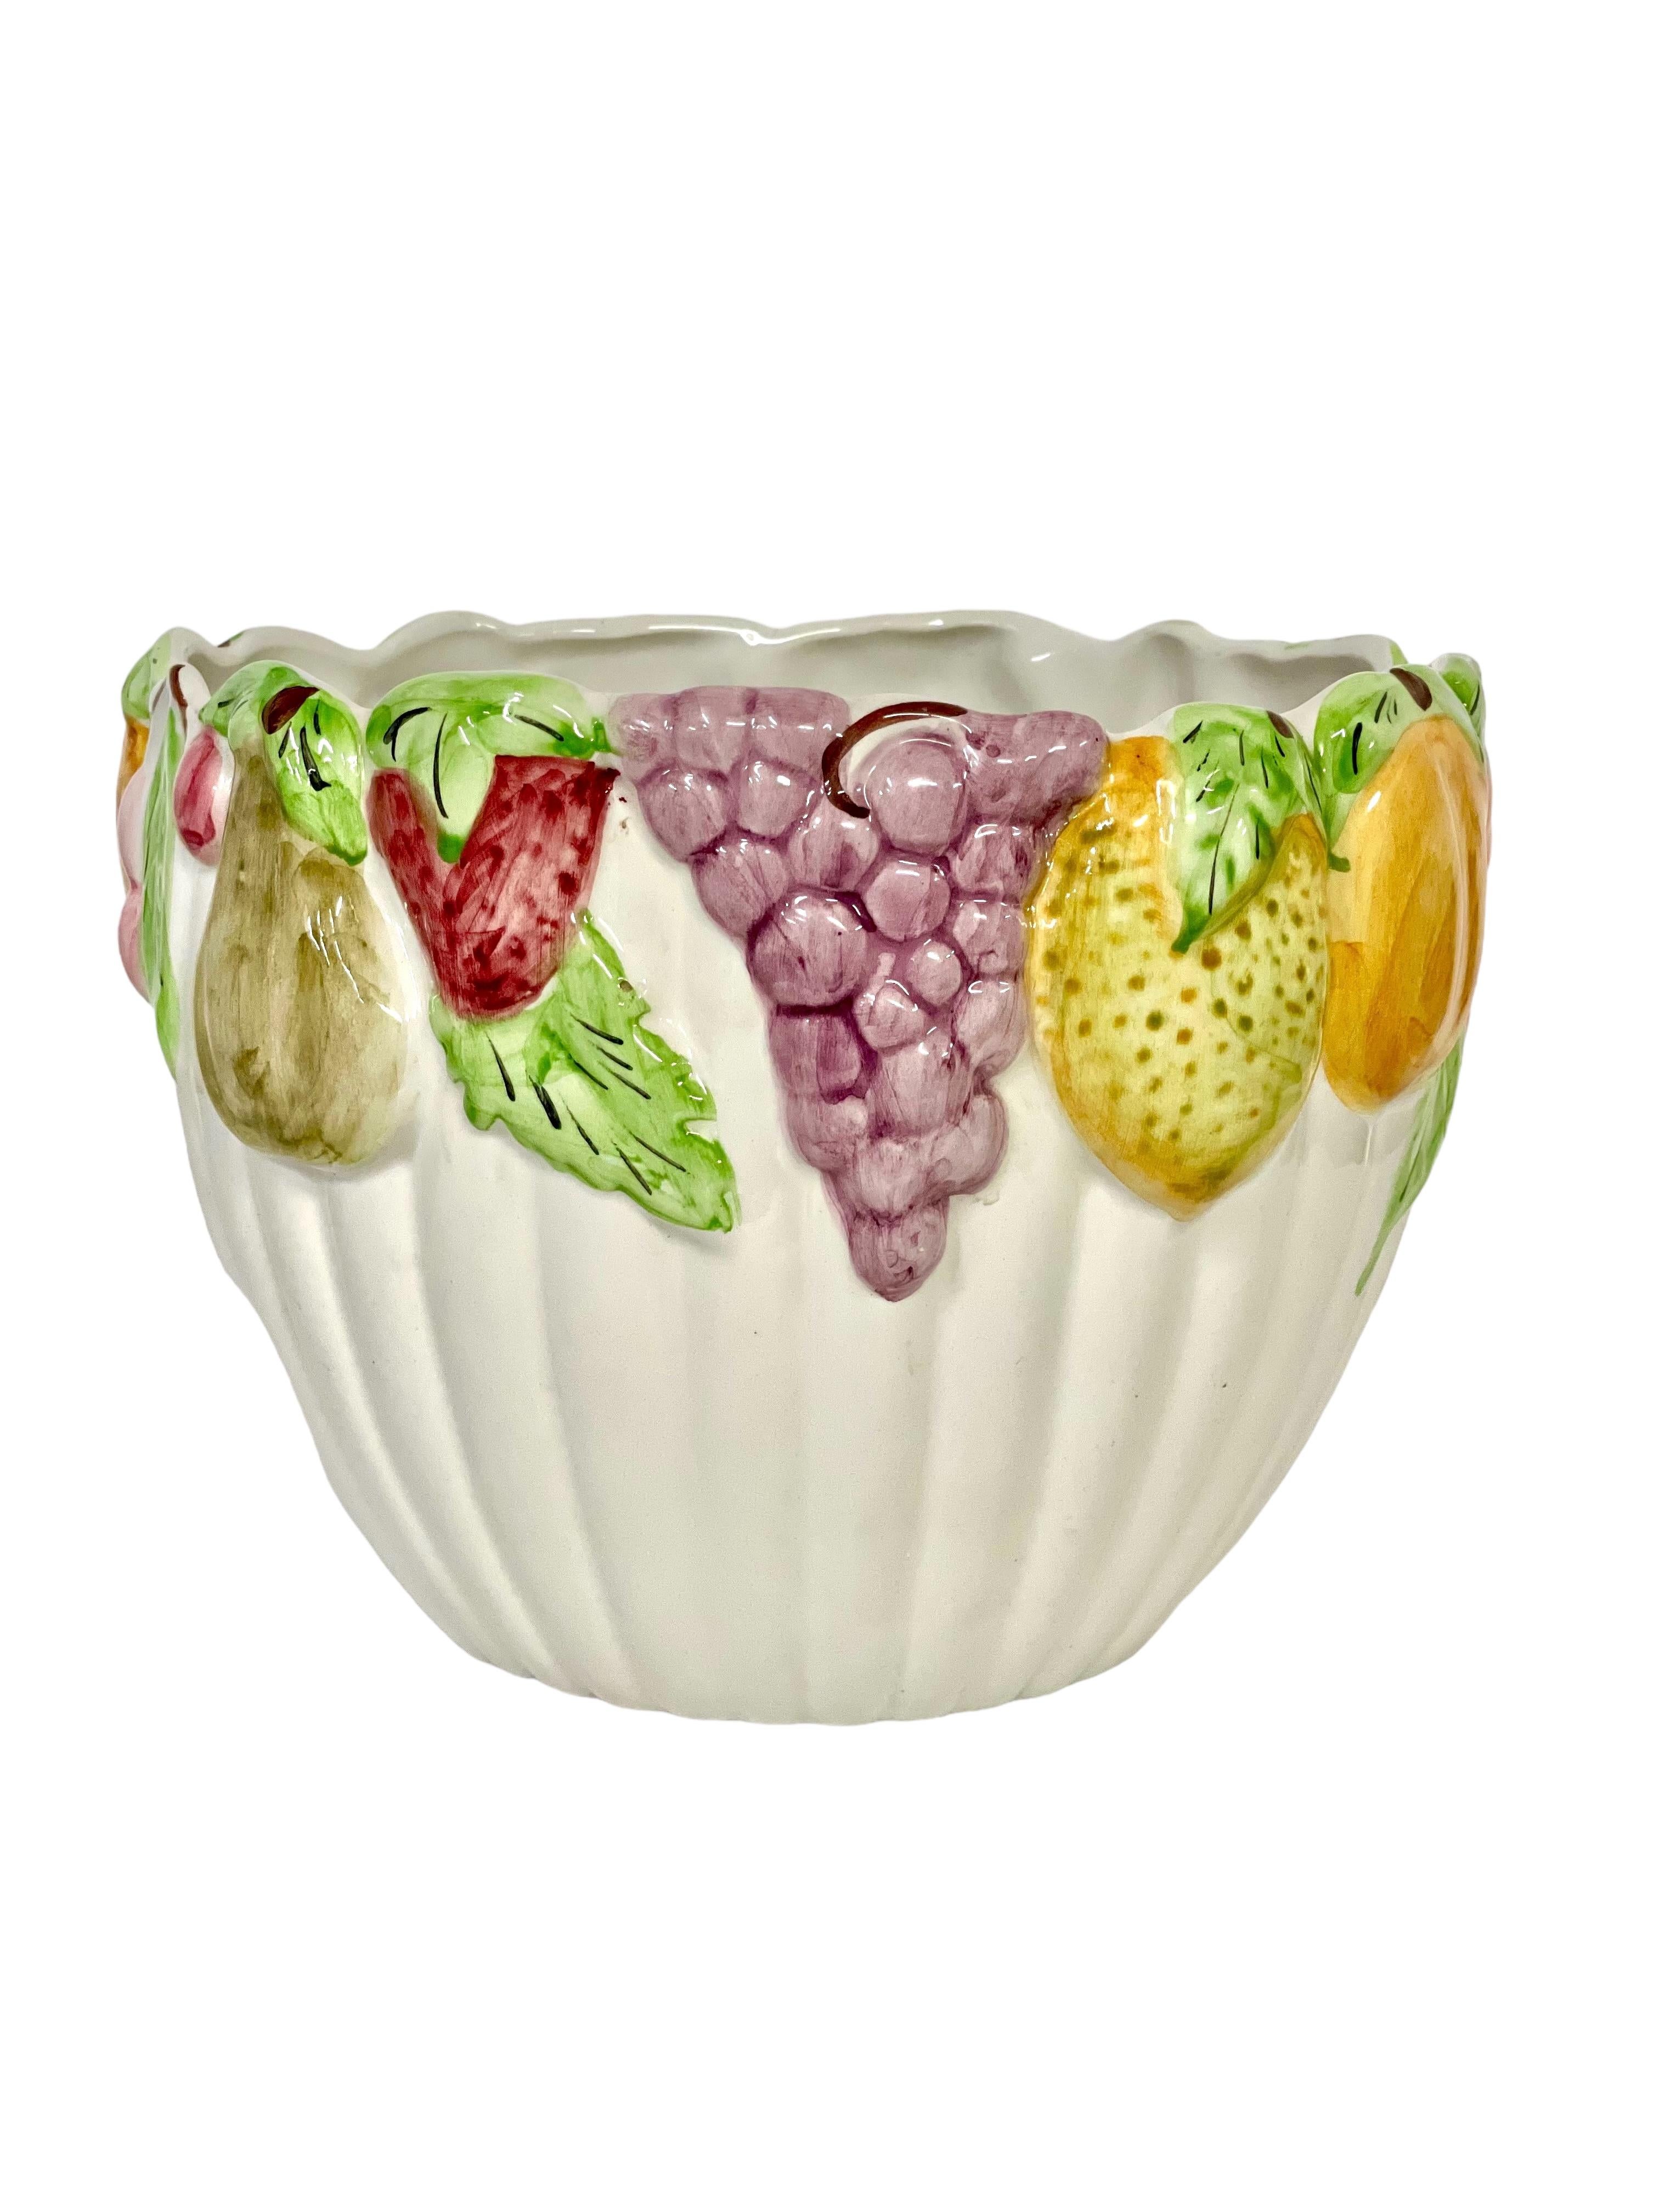 Majolica Cache Pot with Fruit Decoration, 19th Century For Sale 4